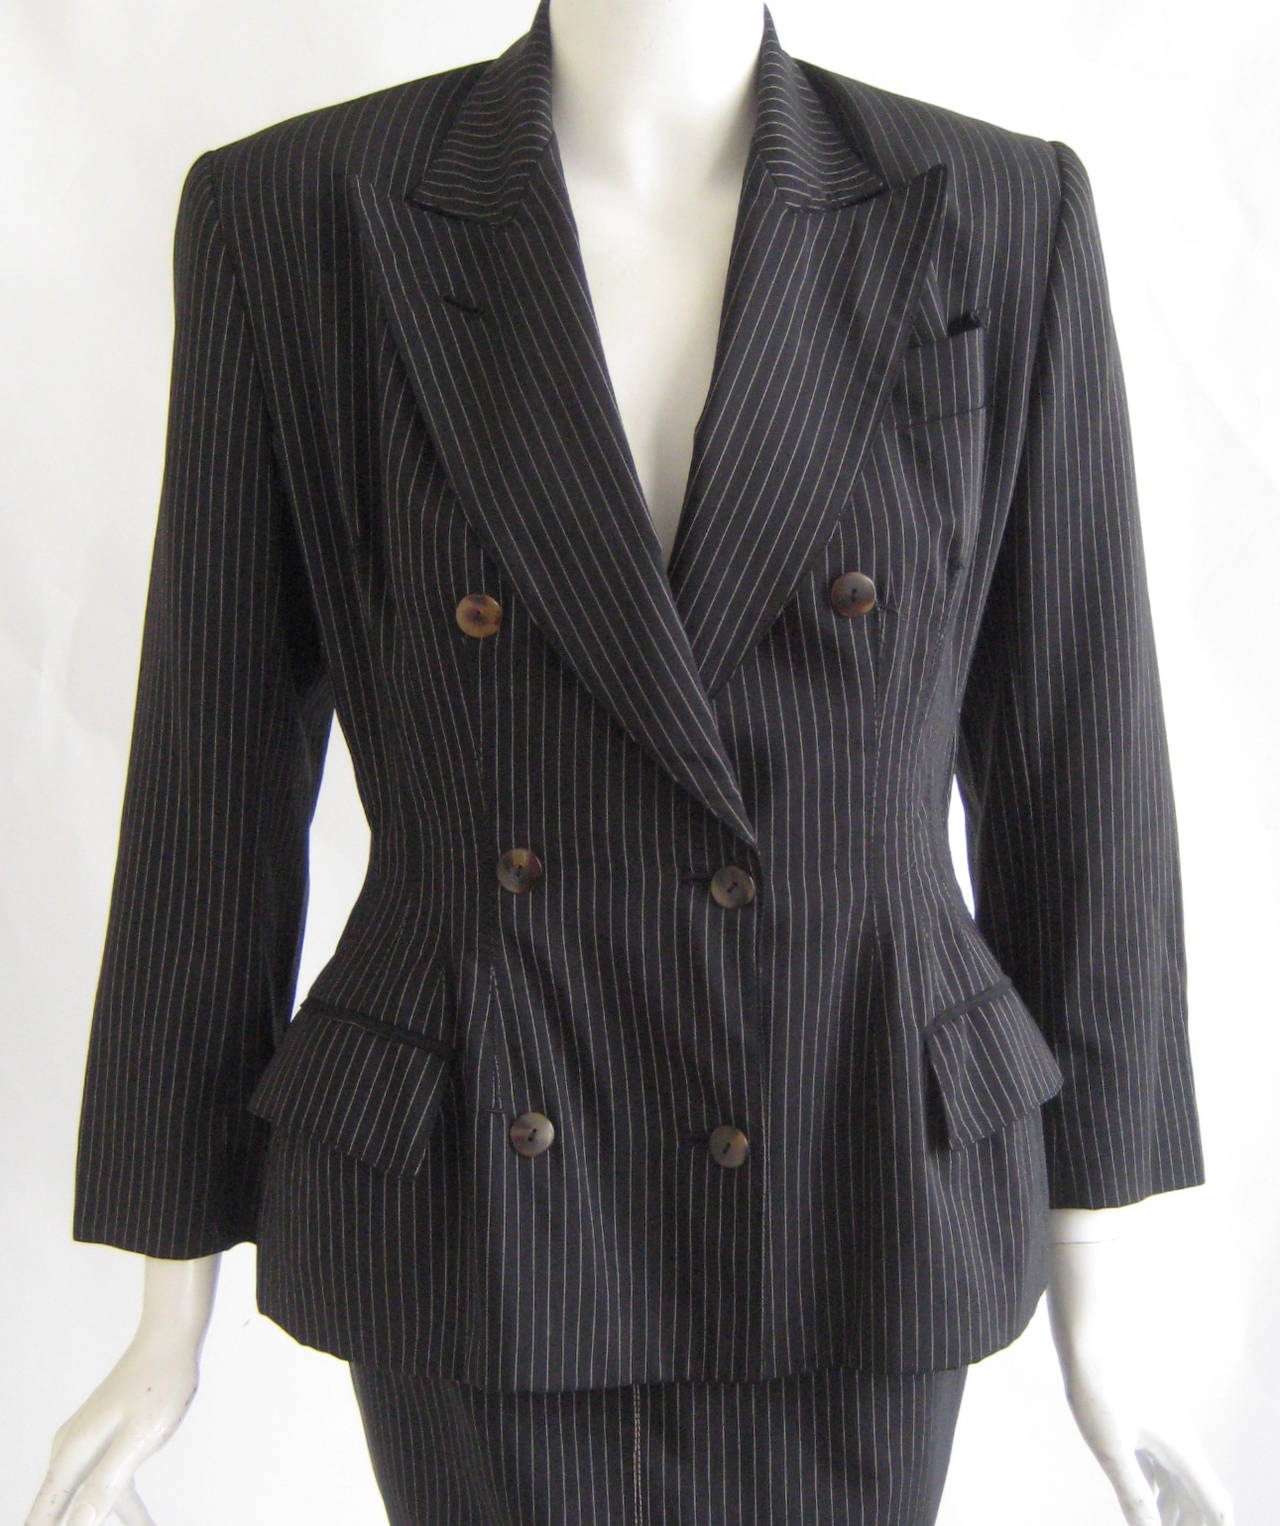 Wonderful early Gaultier suit
Fine pinstripe wool with beautiful printed silk lining
Nip waist and two functioning front pockets
Pencil skirt zips up the back and fastens with one hook and eye
Truly a beautiful piece.This was originally sold at